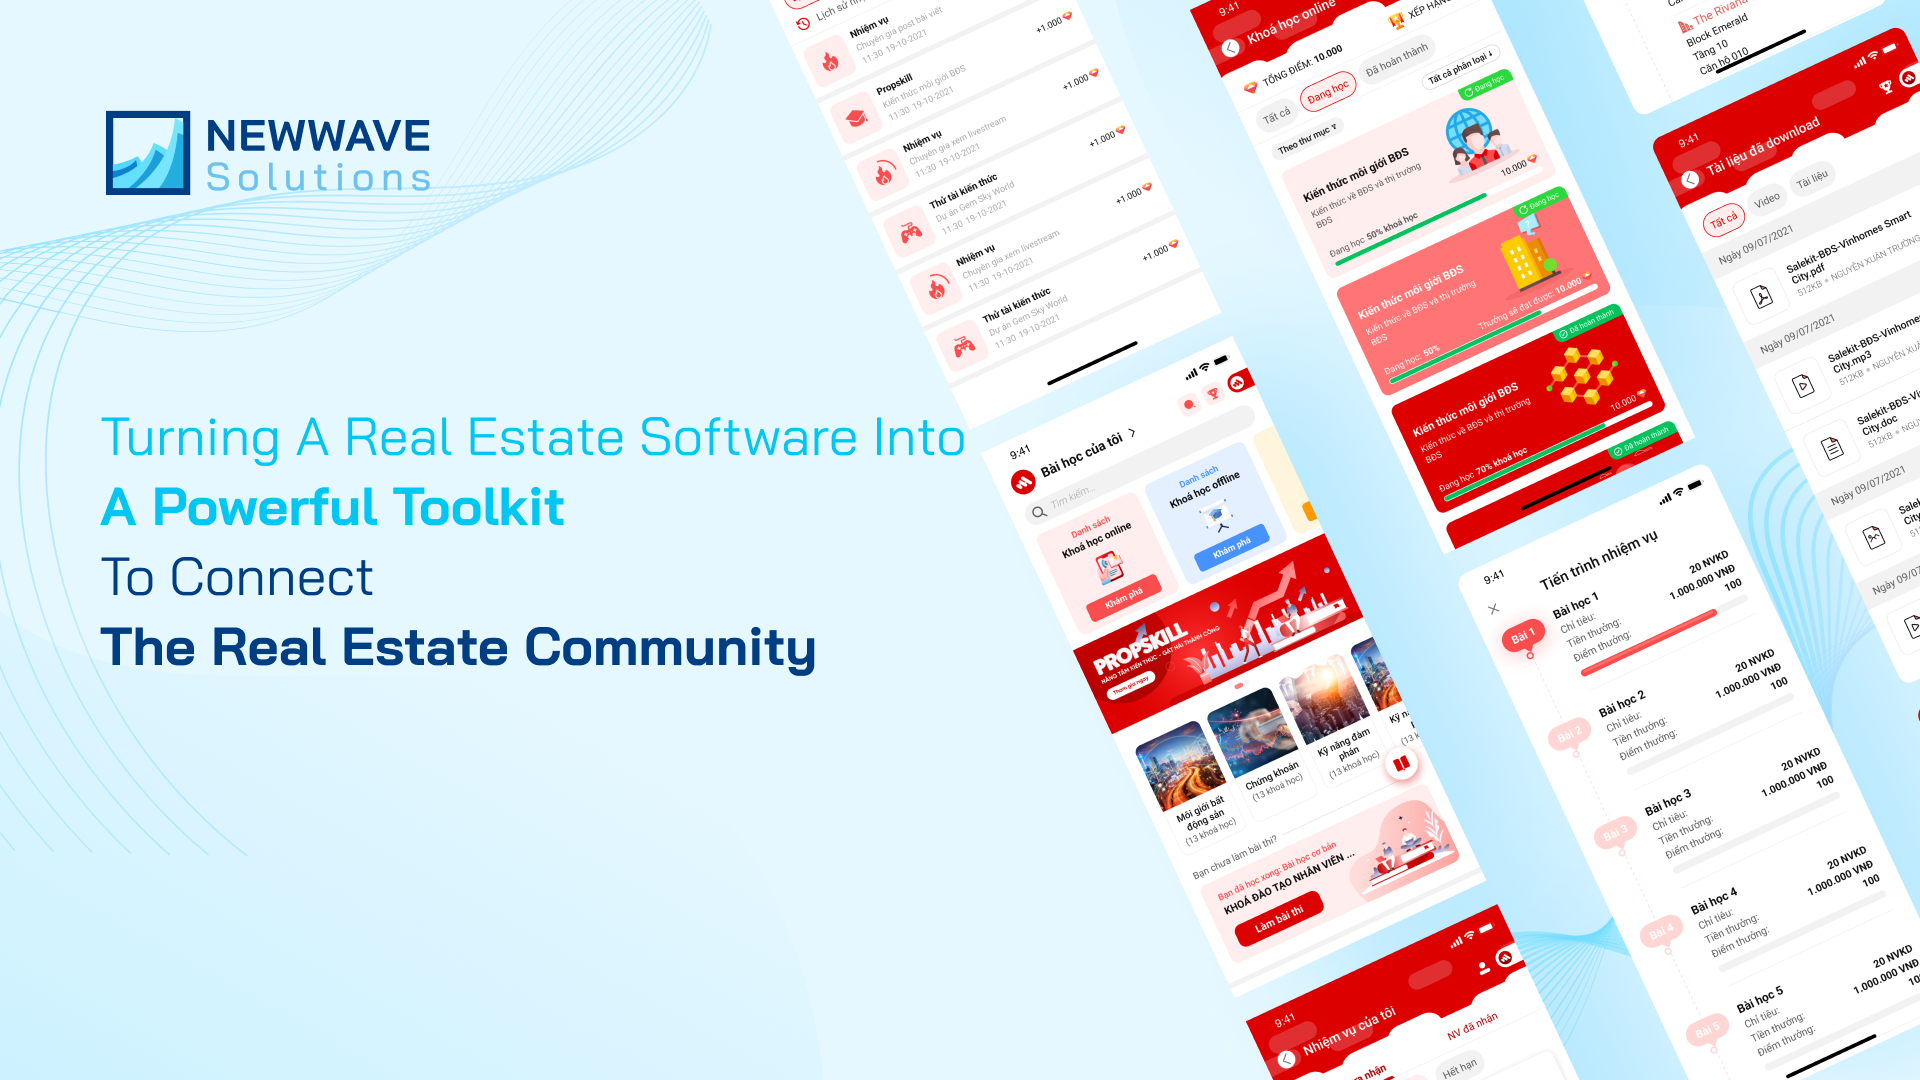 Newwave Solutions - Turning a Real Estate Software into a Powerful Toolkit to Connect the Real Estate Community